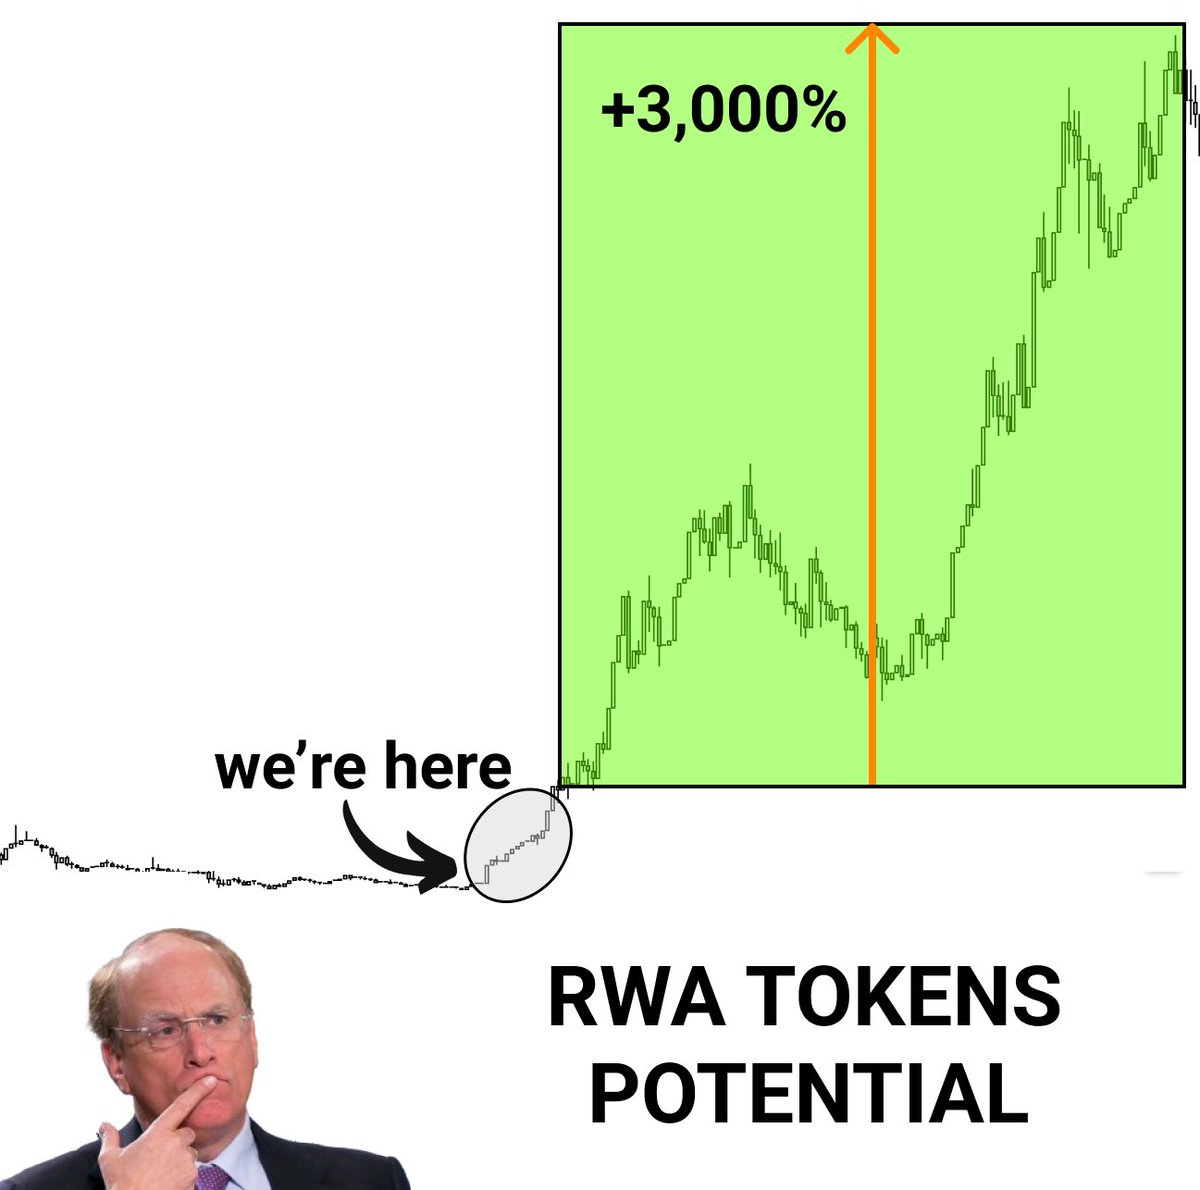 RWA tokens are set to boom in the coming years.

BlackRock's entry signals 50-100x potential for 2024-2025

I’ve spent over 70 hours researching which tokens will grow first.

Explore with me to ensure you don't miss out 👇🧵